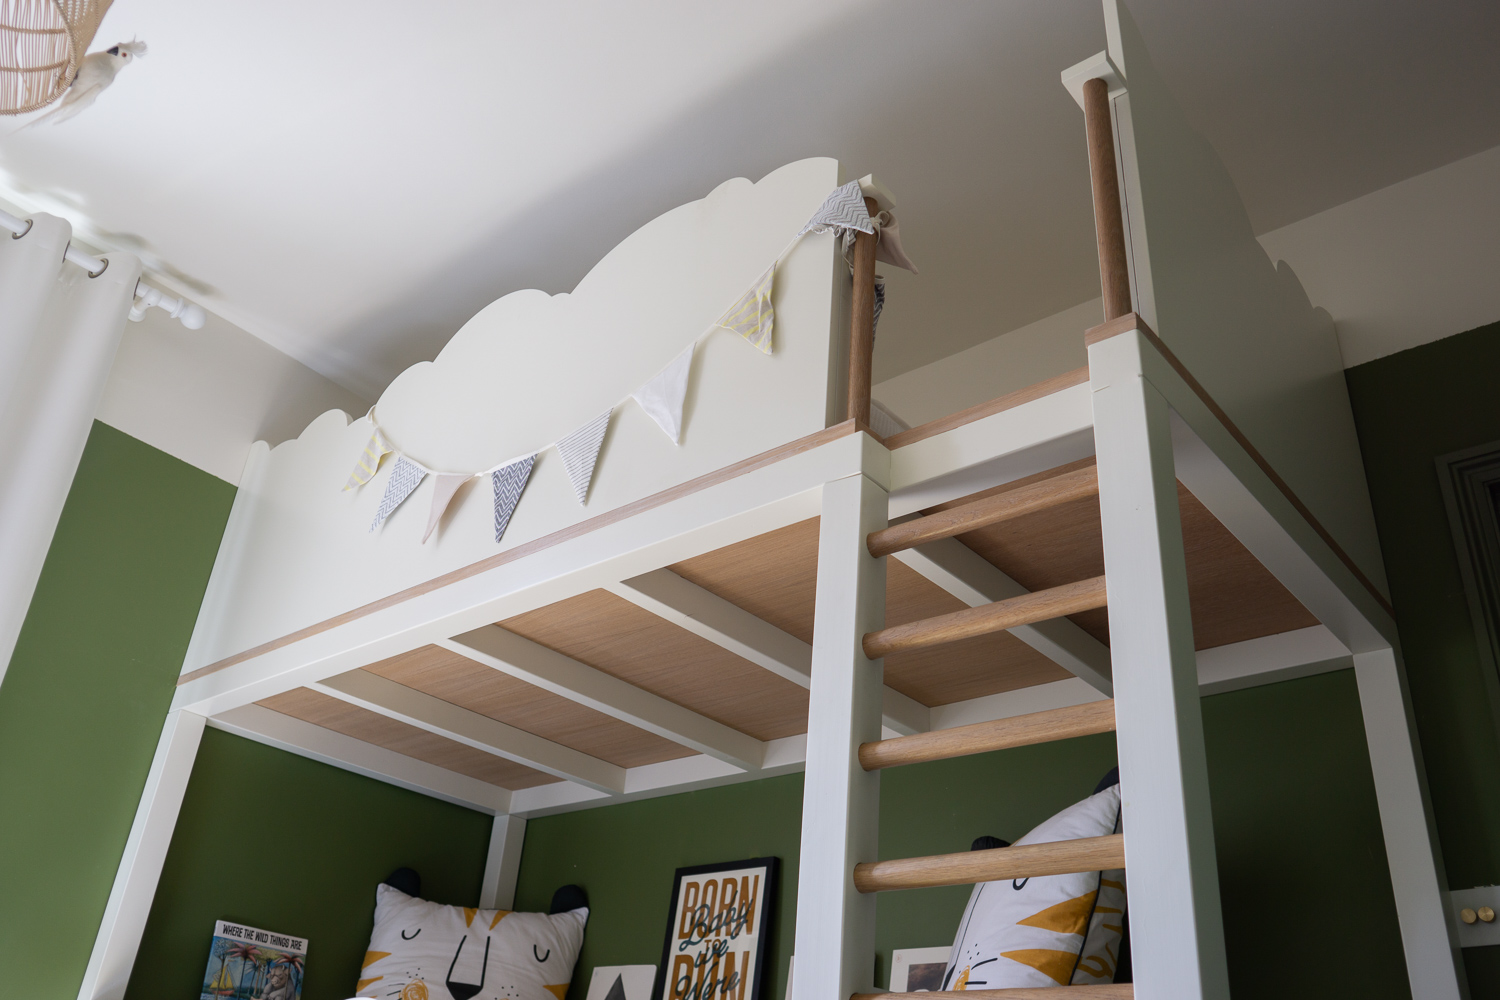 Upper Bunk, Fits a twin and is super cozy up there. 
